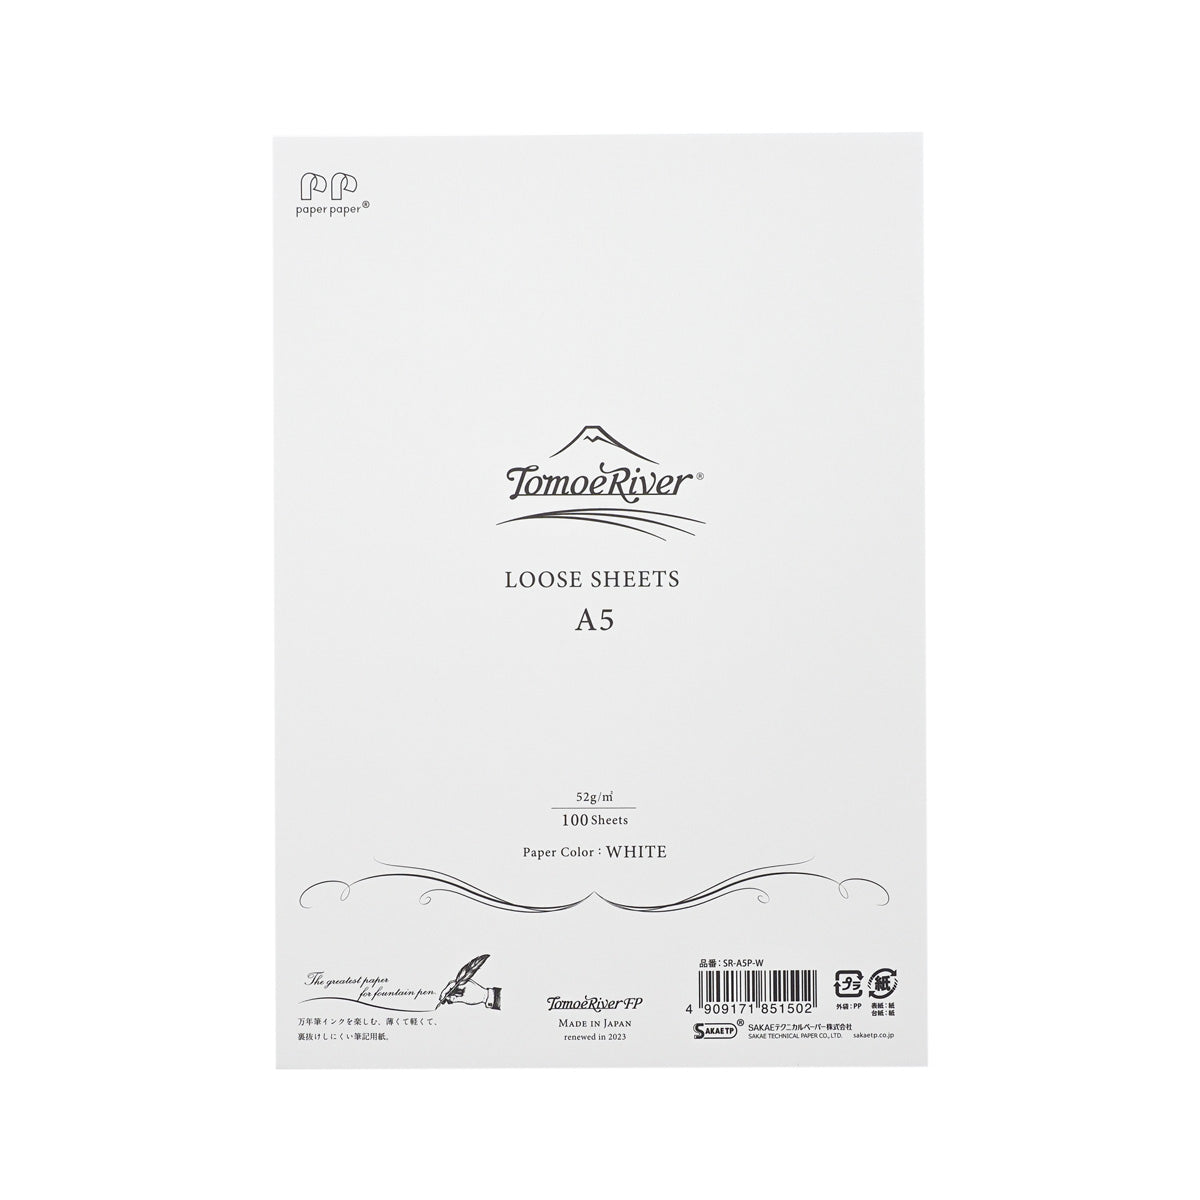 Tomoe River paper: Din A5 loose sheets white